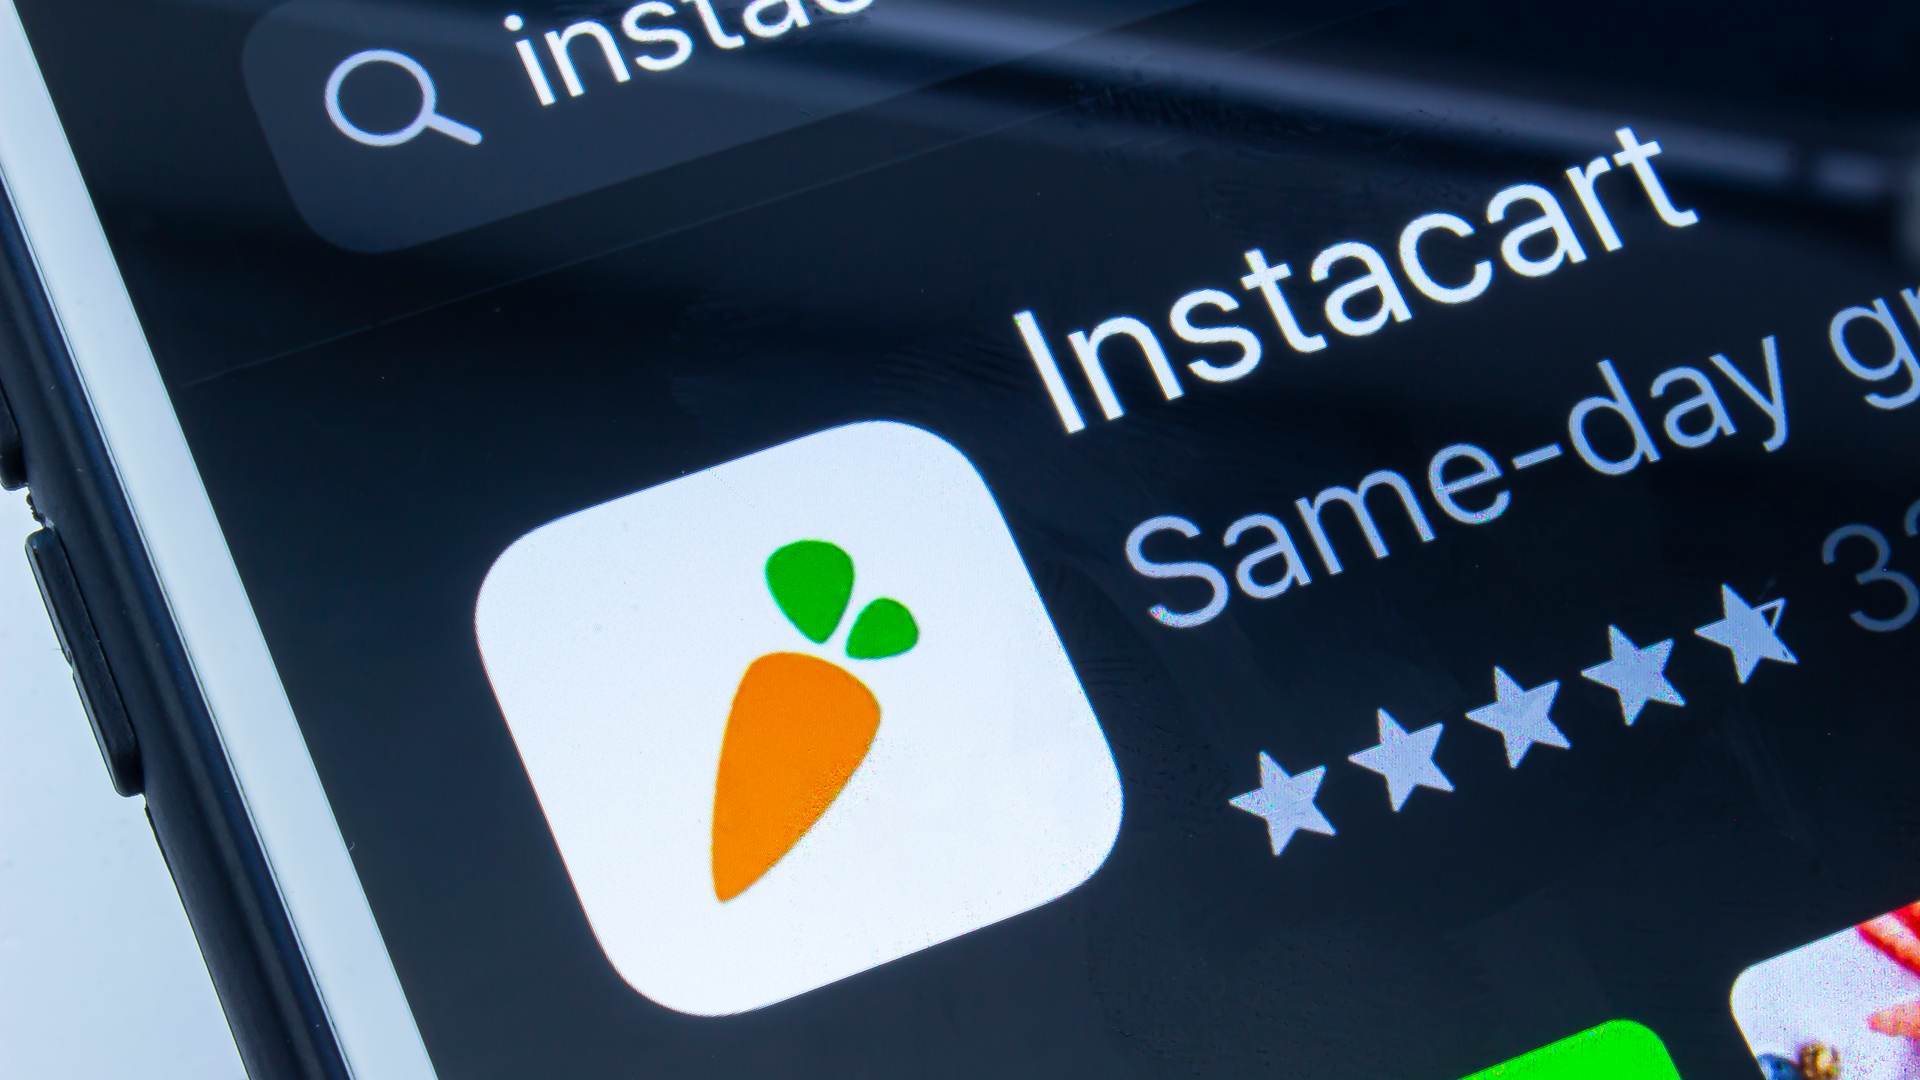 15-minute grocery delivery company Instacart app logo